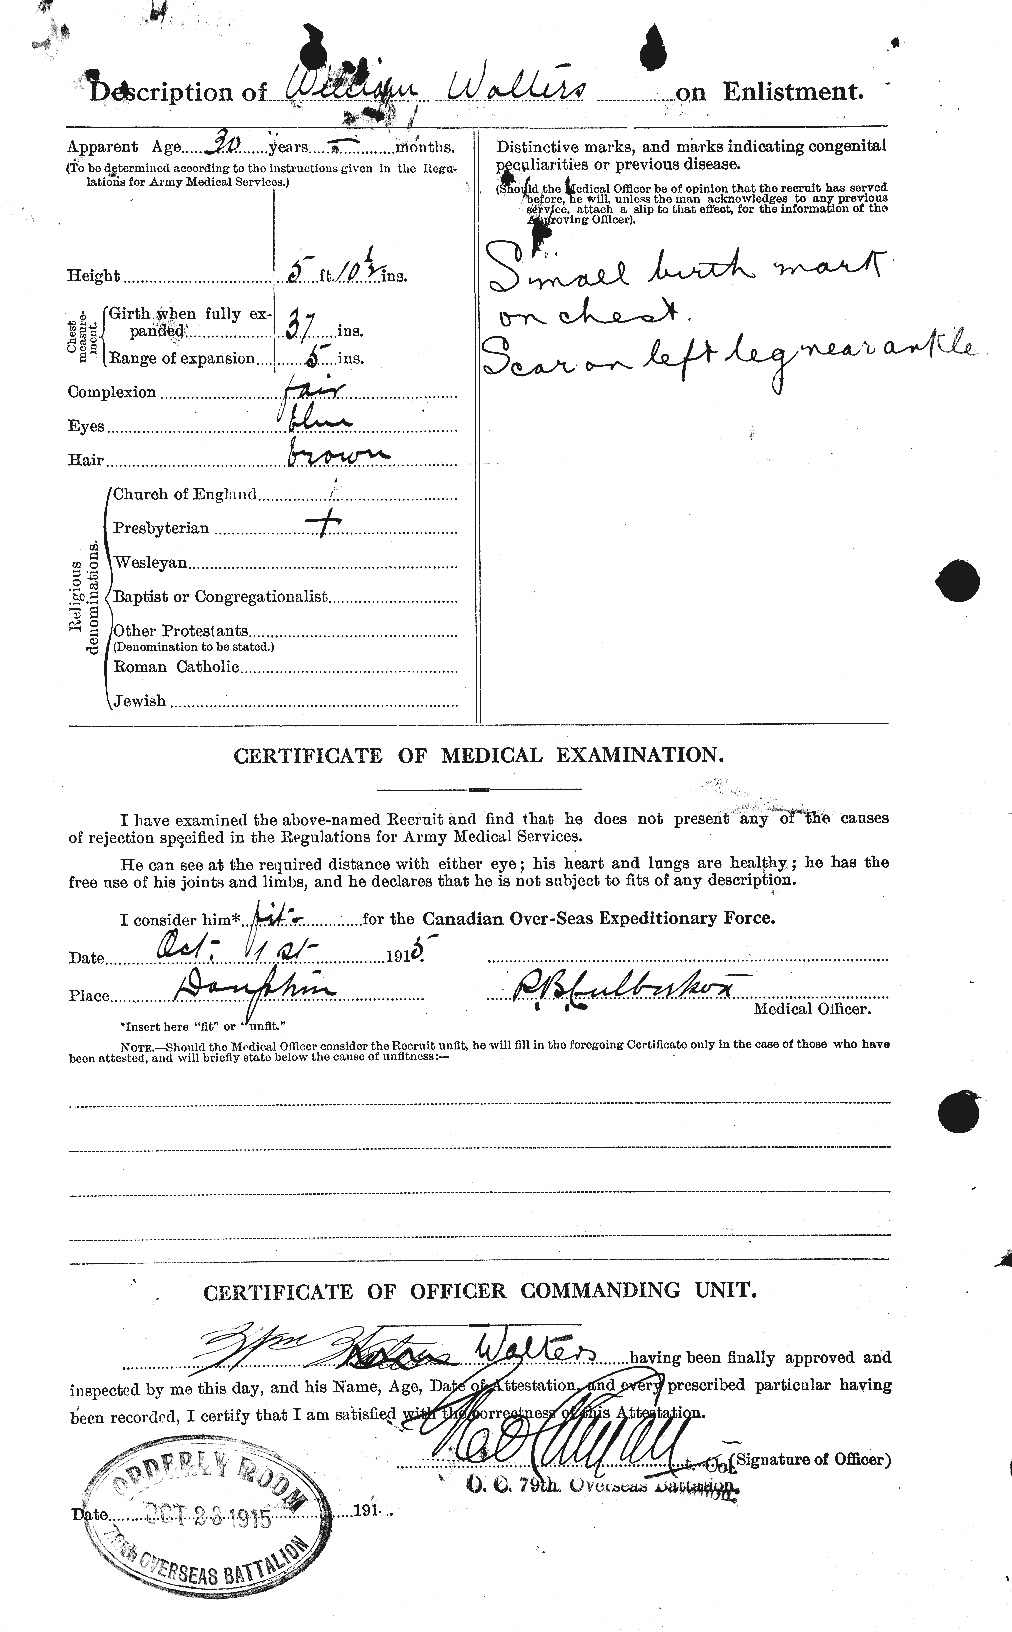 Personnel Records of the First World War - CEF 655469b